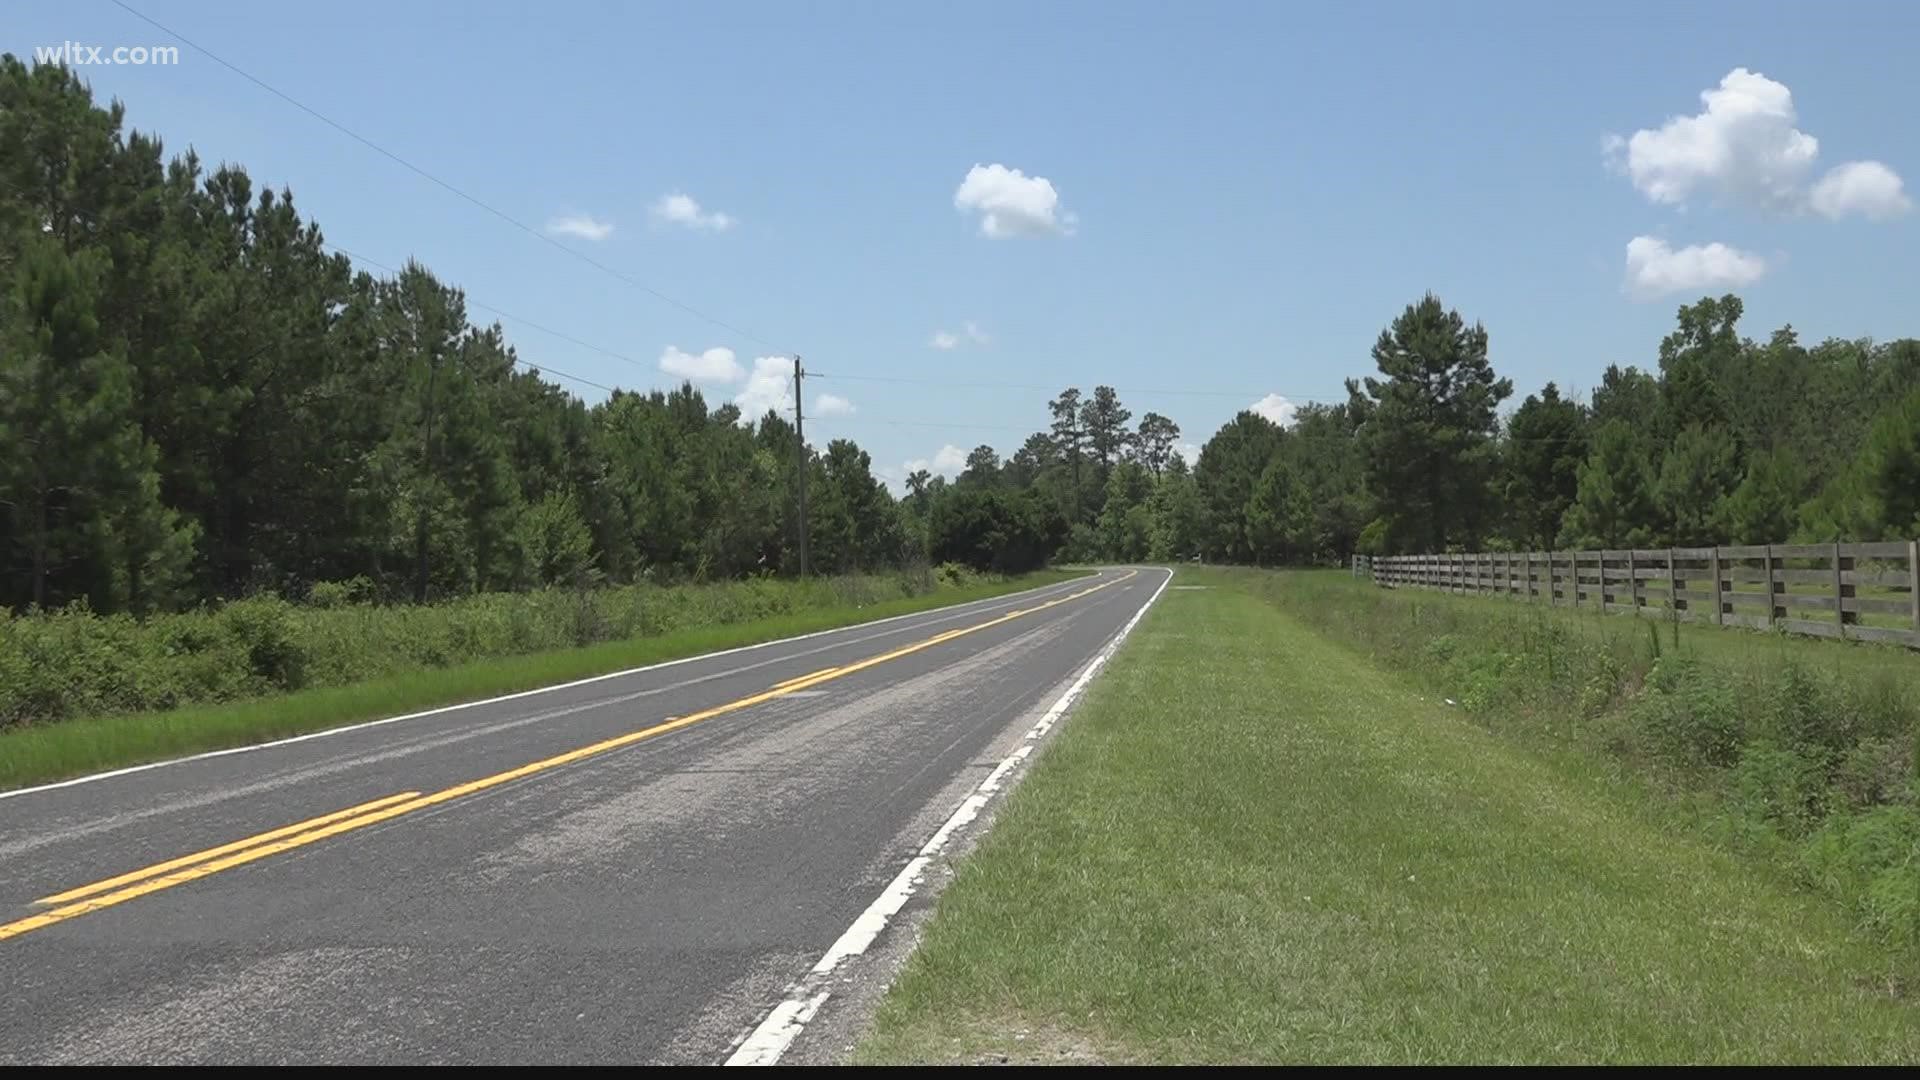 The Town of Holly Hill has annexed 73.9 acres of land along Bunch Ford Road, which will be developed into new homes in the town.